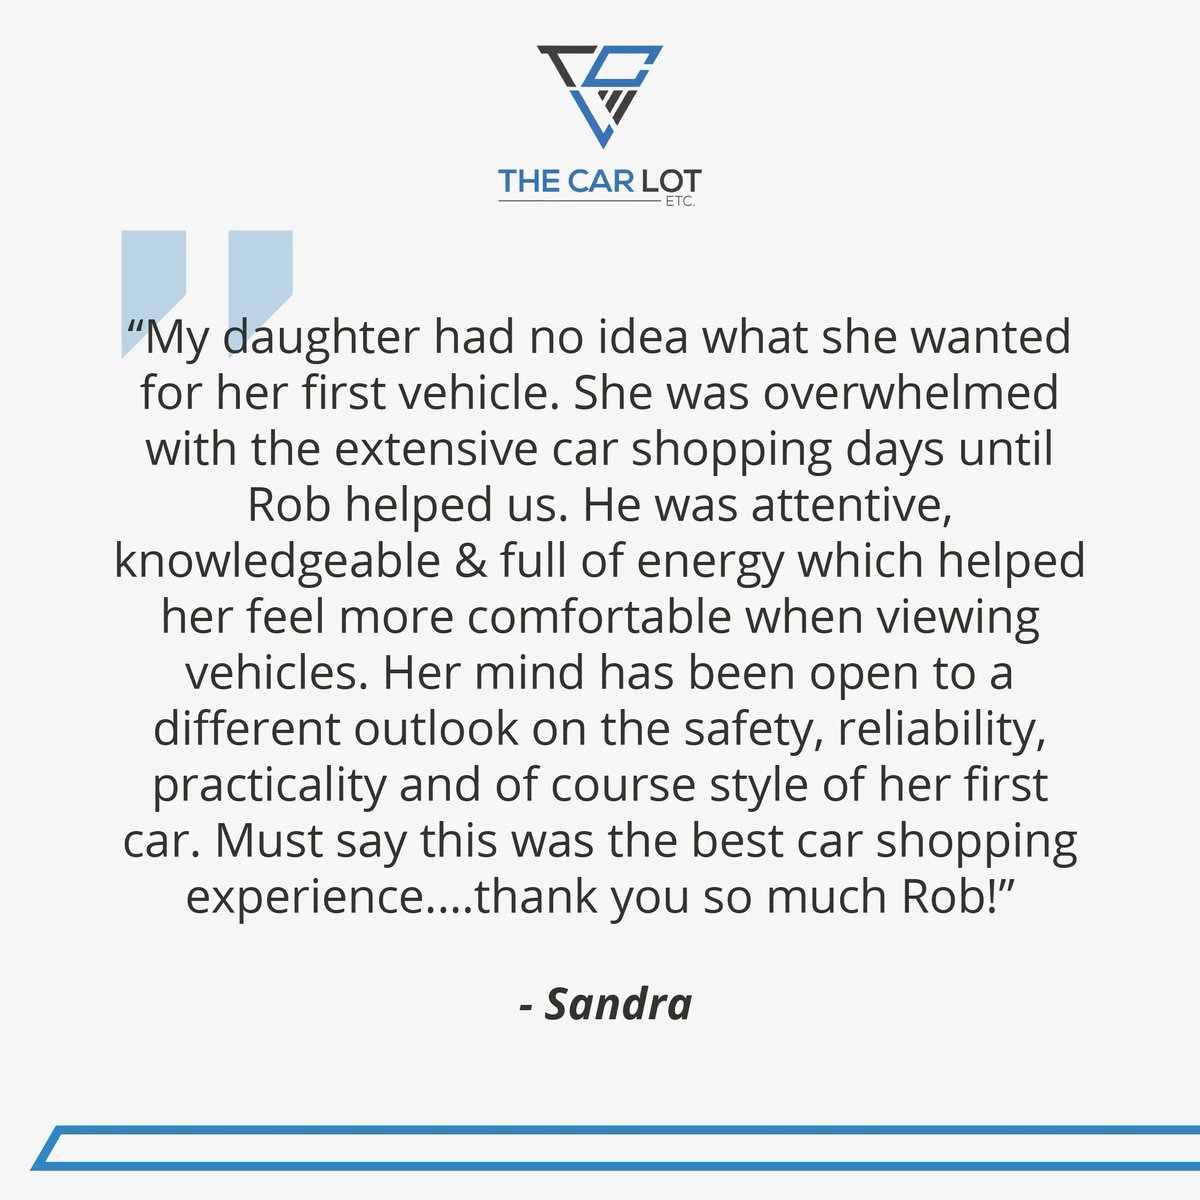 Our staff want to make your buying experience the best it can be! We want our customers to feel comfortable in the buying process so you can choose the best vehicle for your needs🚘

#TheCarLot #UsedDealership #PreOwnedVehicles #HappyCustomers